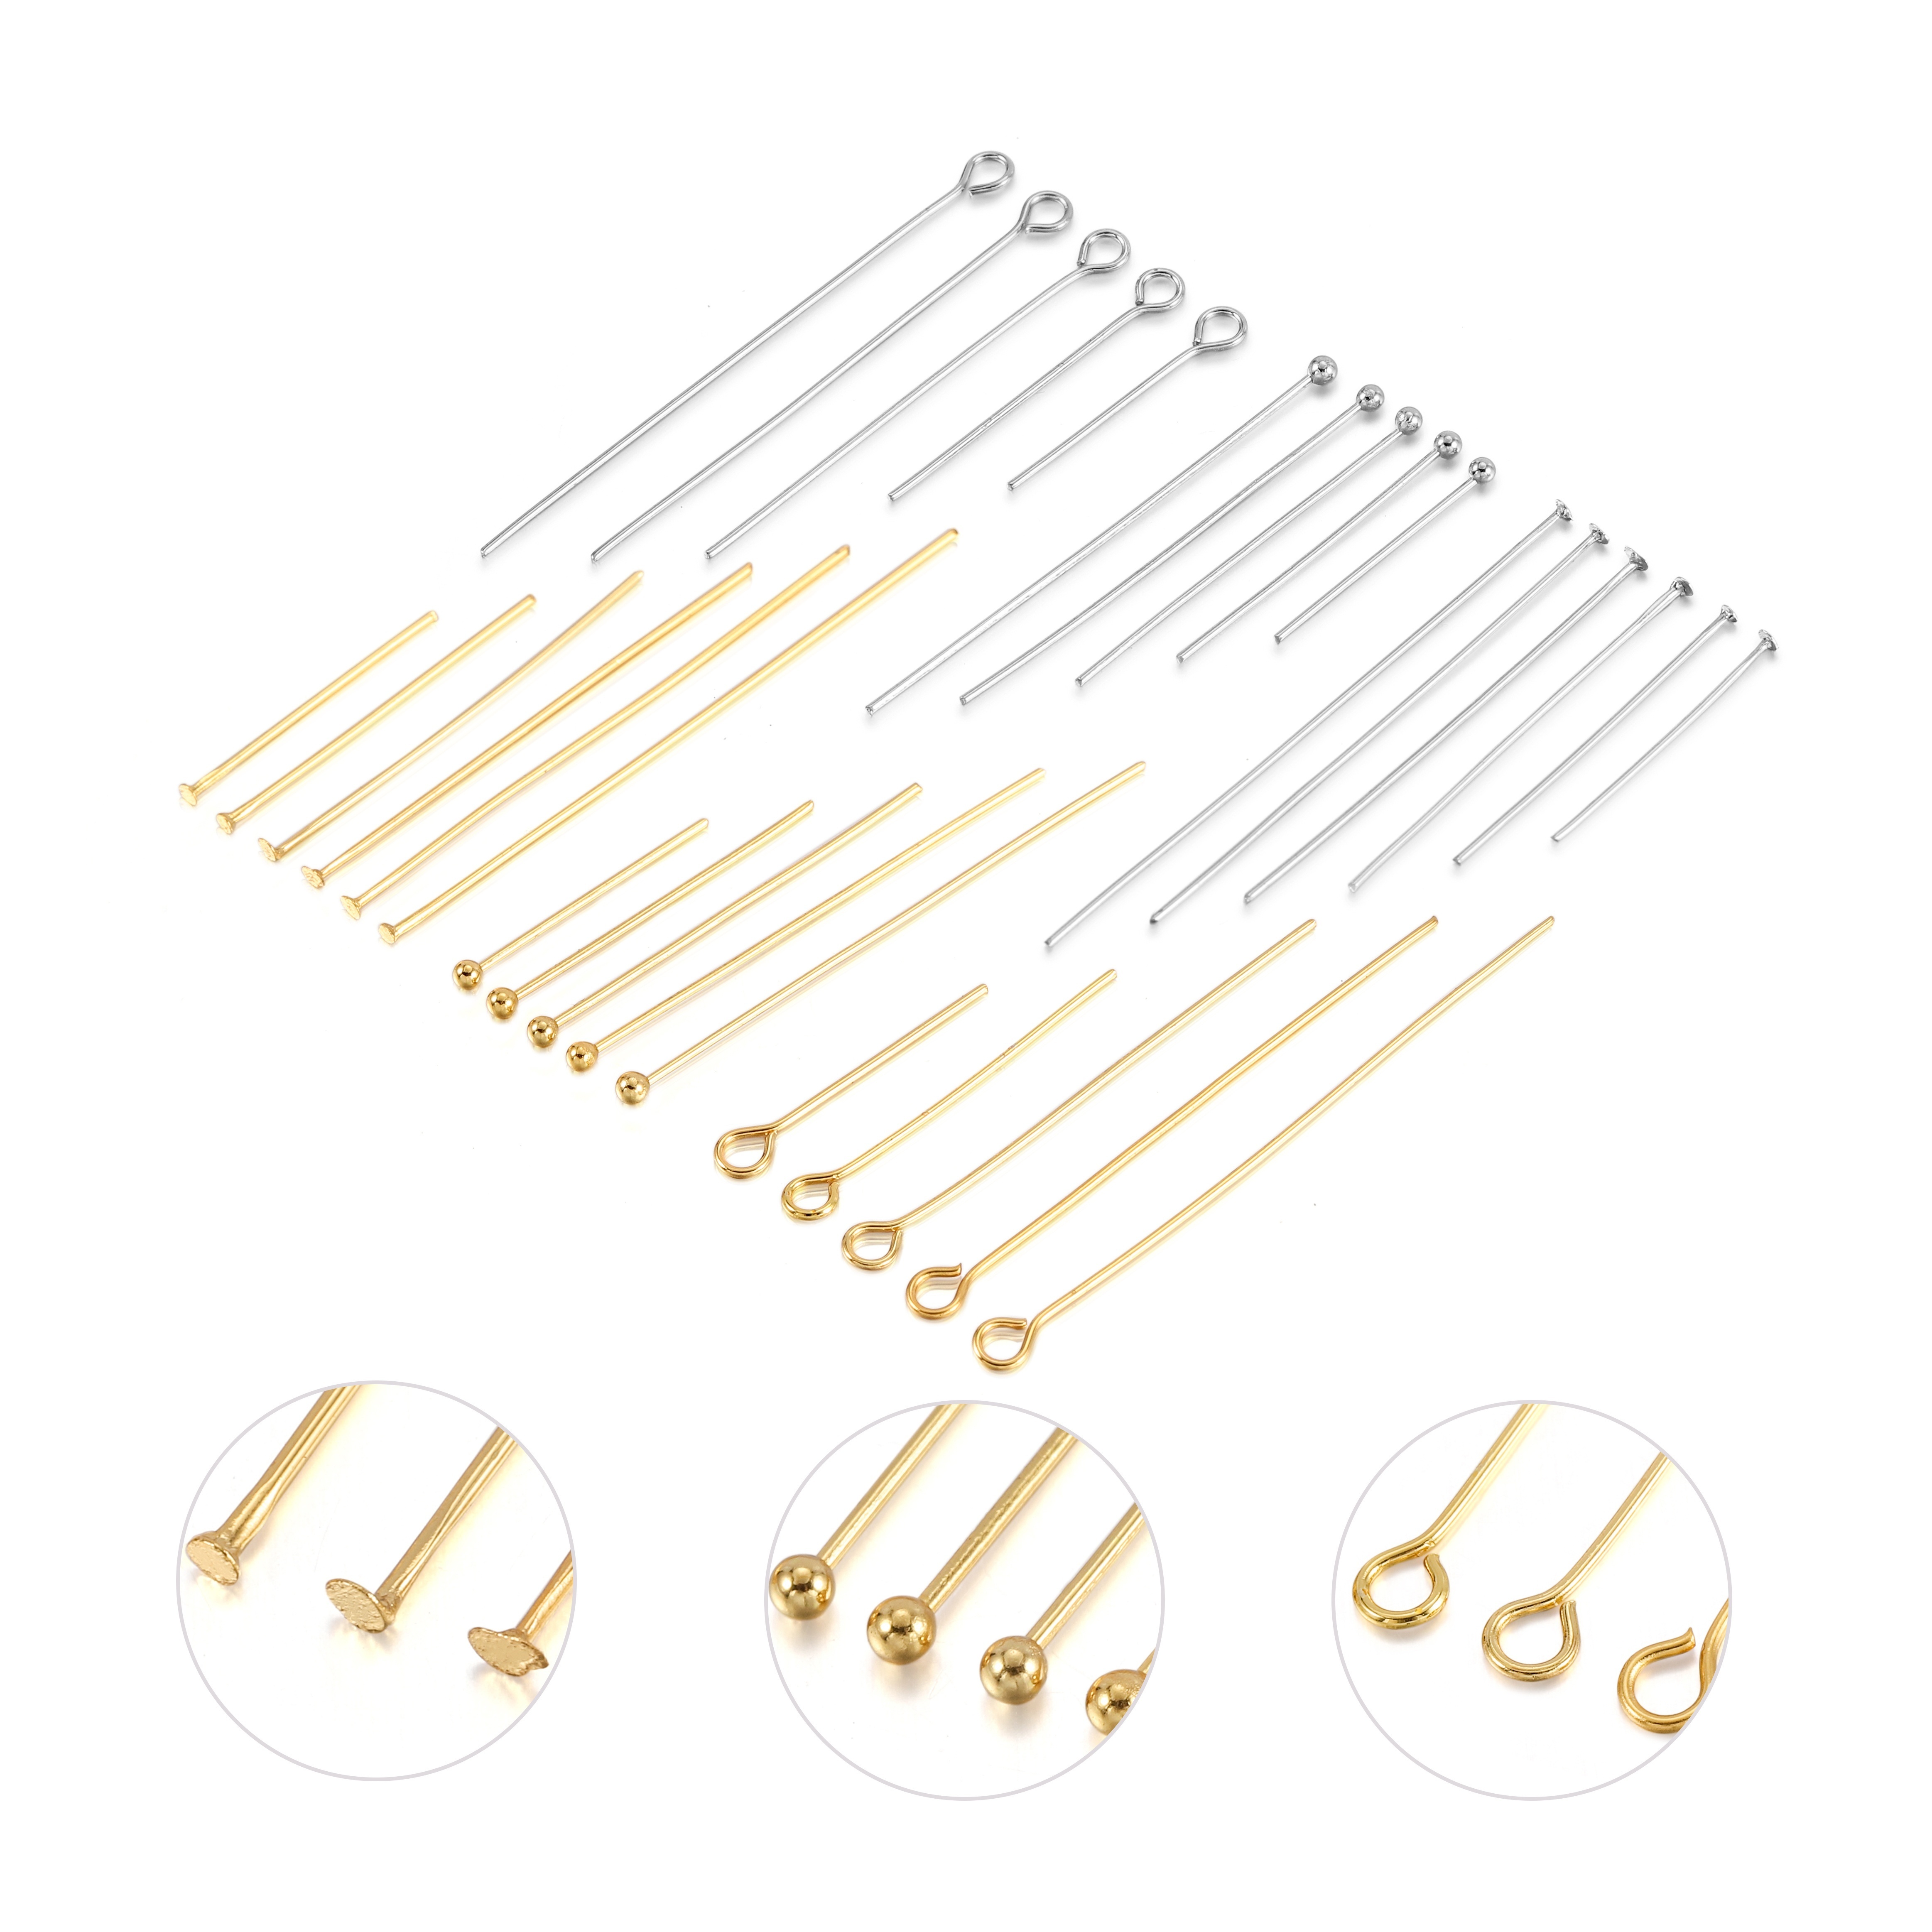 Flat Headpins T Pins 2 Inch 20 Gauge 20G, 1.8mm Head, Jewelry Making,  Silver Findings, Silver Plated, 100pcs 